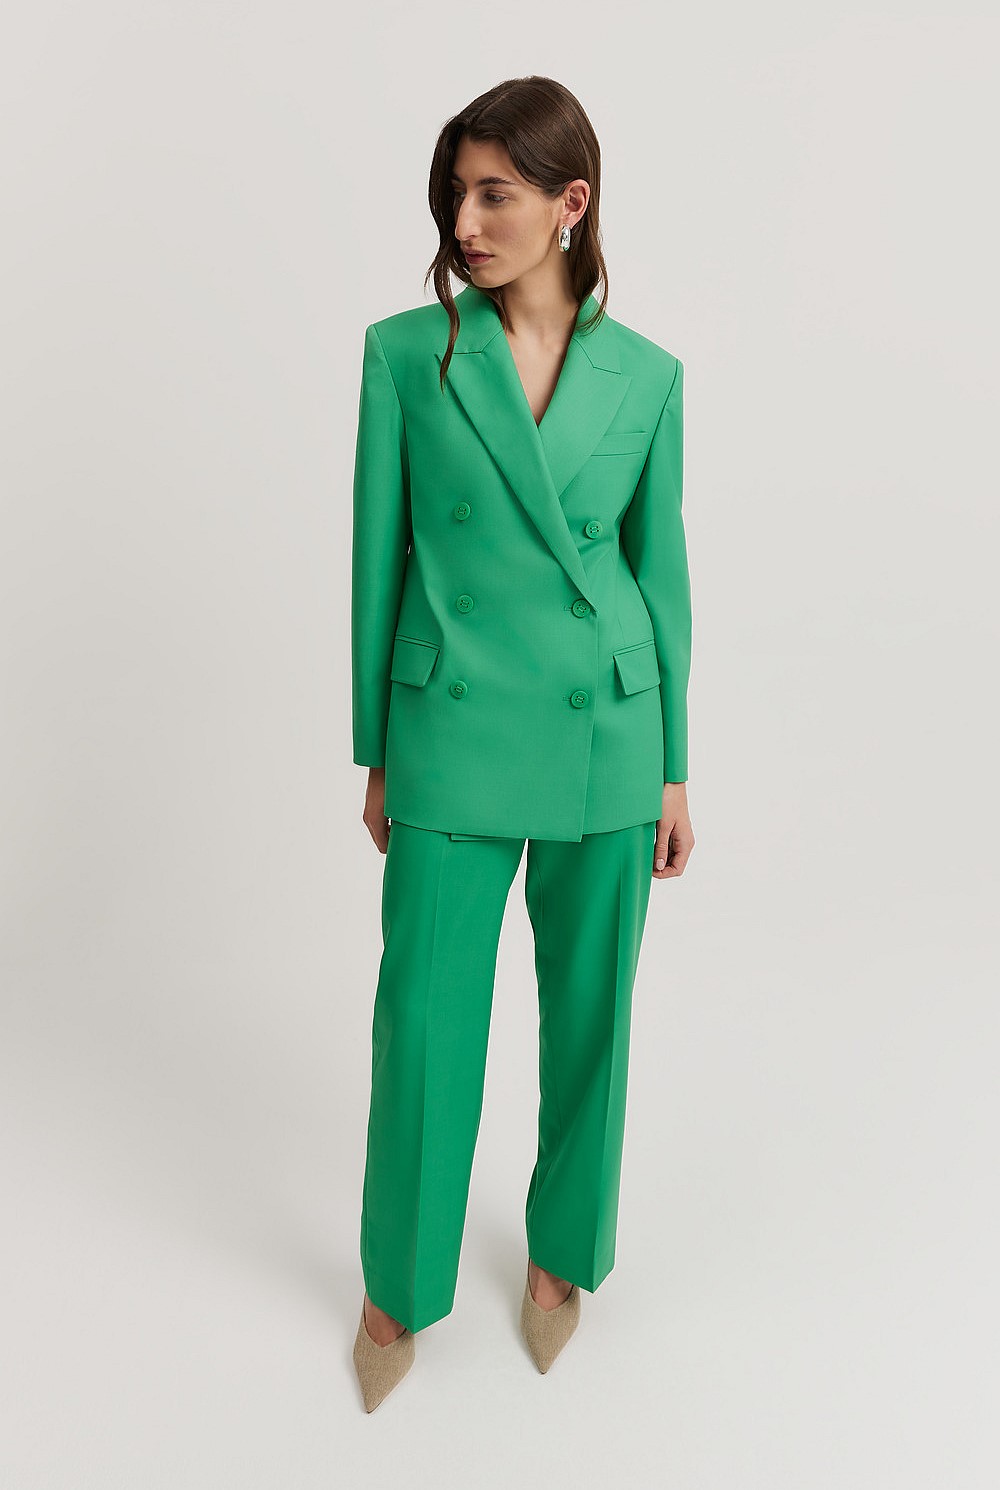 Jewel Green Tailored Double-breasted Blazer - Jackets & Coats | Outlet